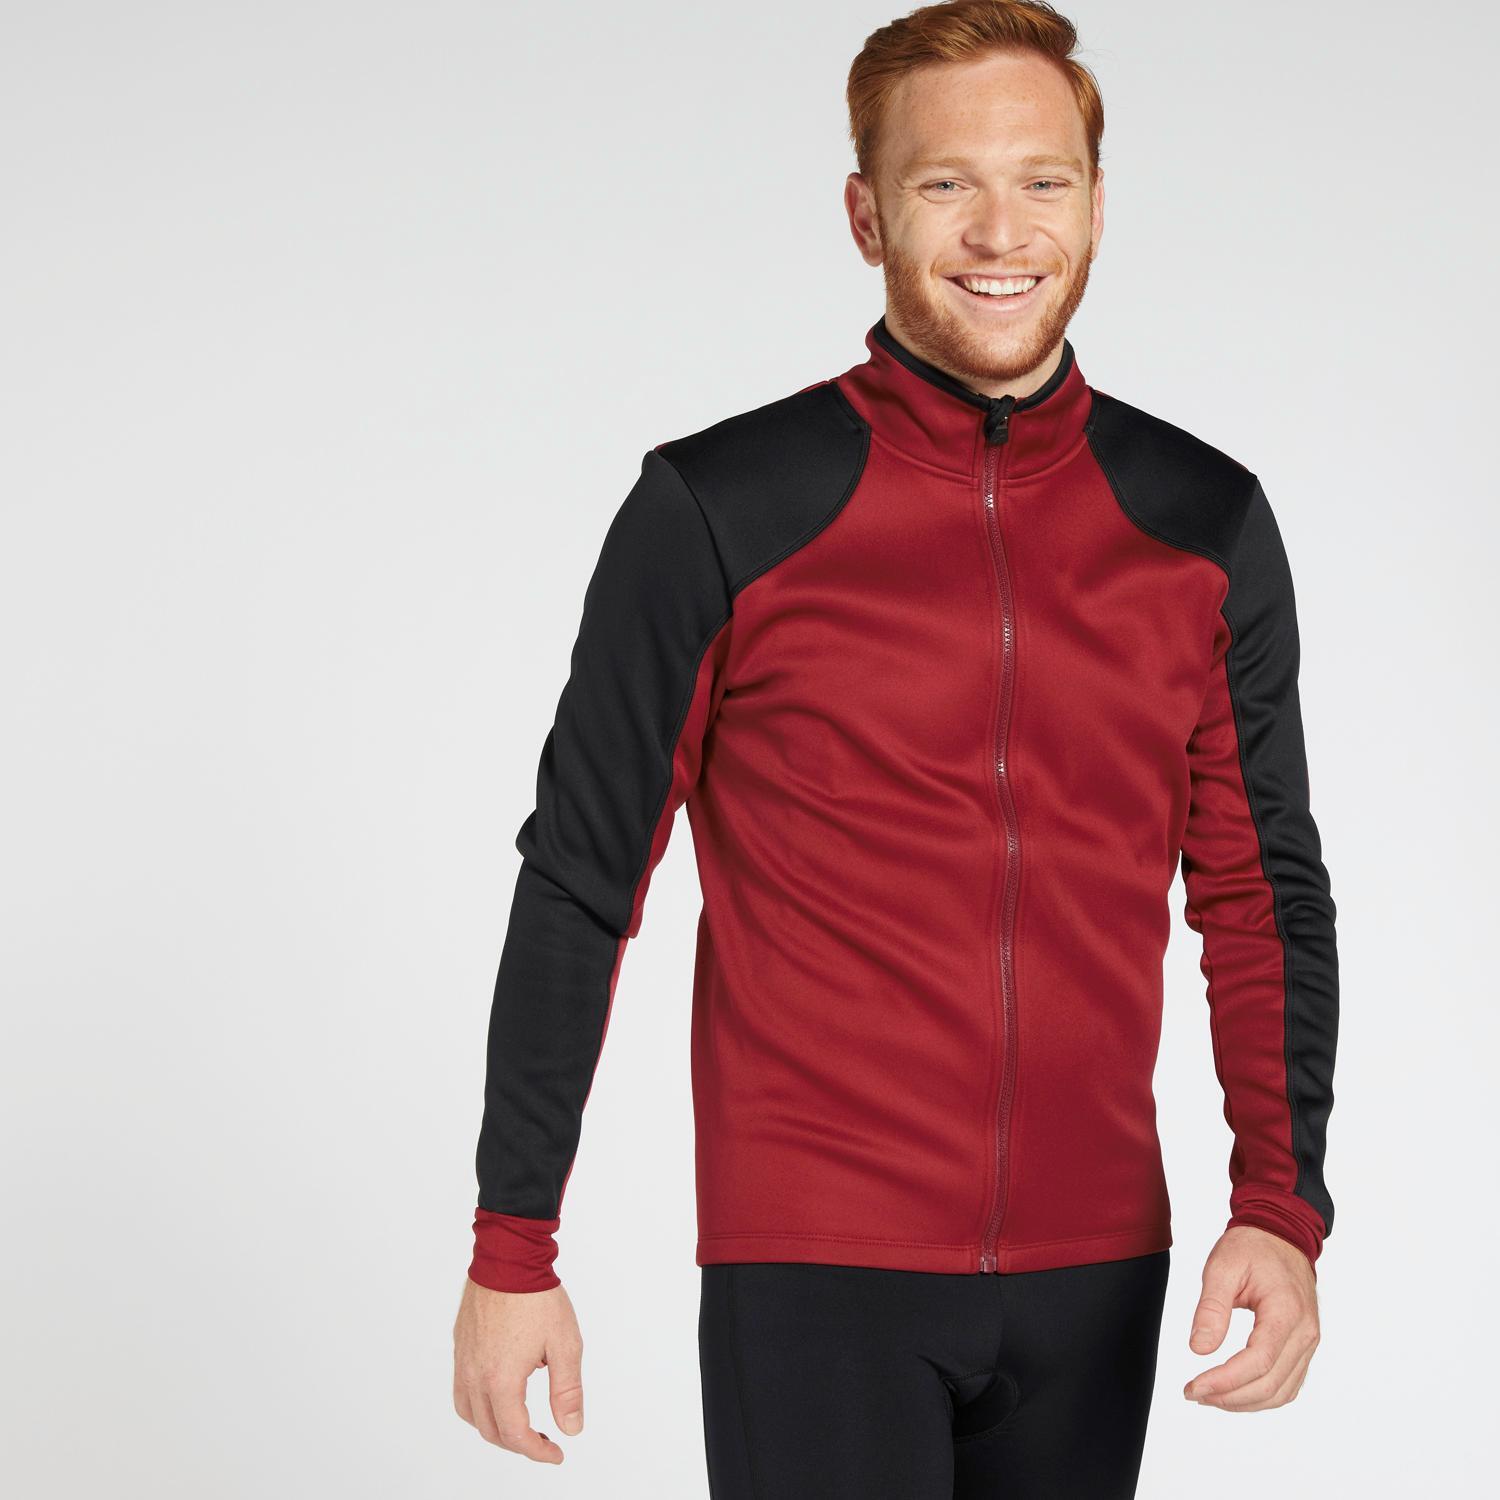 Mitical Bronce - Rouge - Veste Cyclisme Homme sports taille S